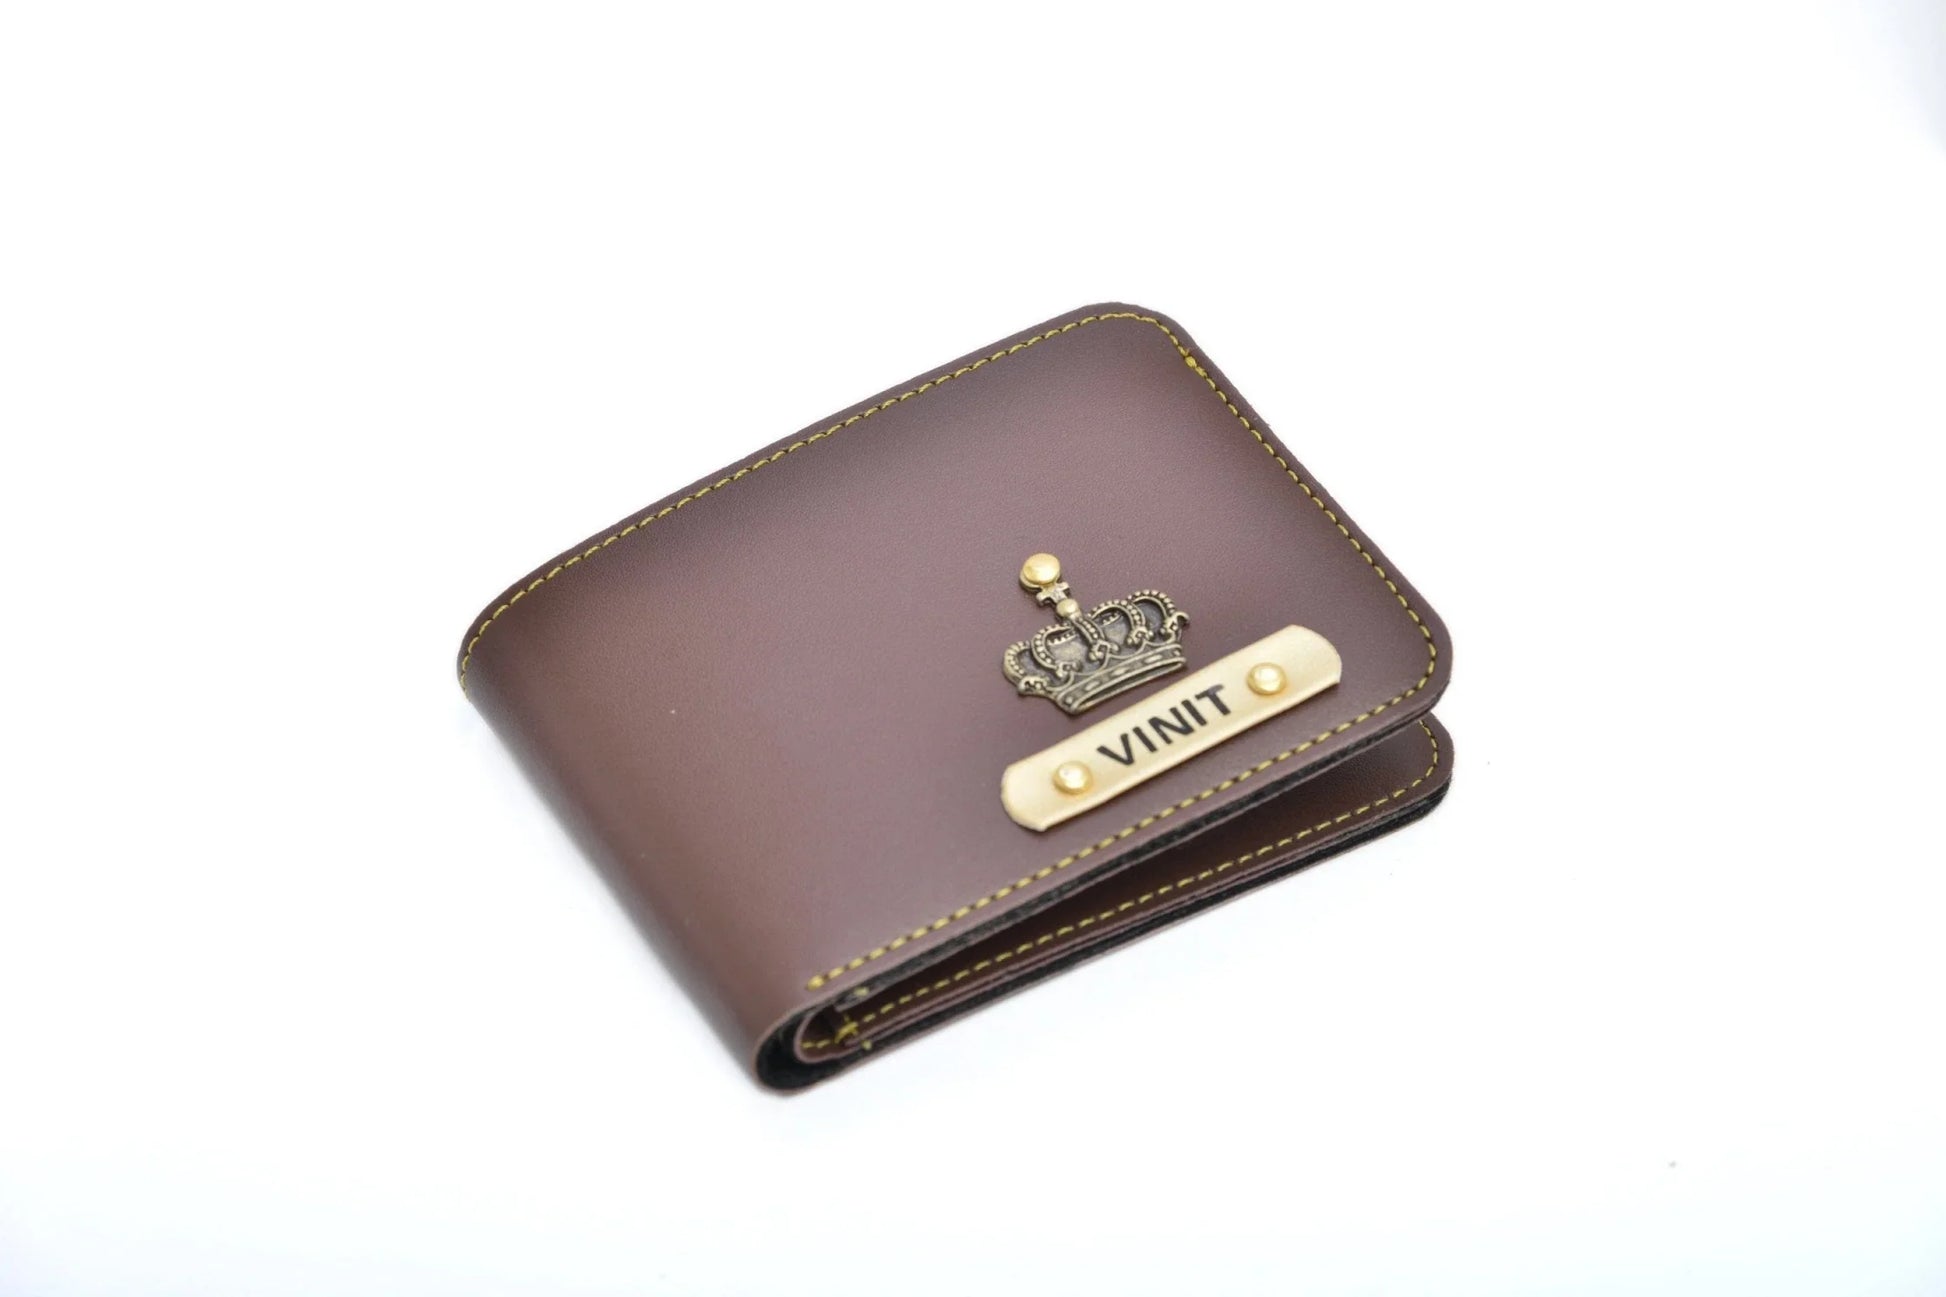 Stylish wallet made with the best quality synthetic leather is the perfect touch to any office/formal outfit. The option to customize it with your name and lucky charm makes it that much more personal and unique. This also makes for a best business gift! Always be trending and in style with our personalized wallets.